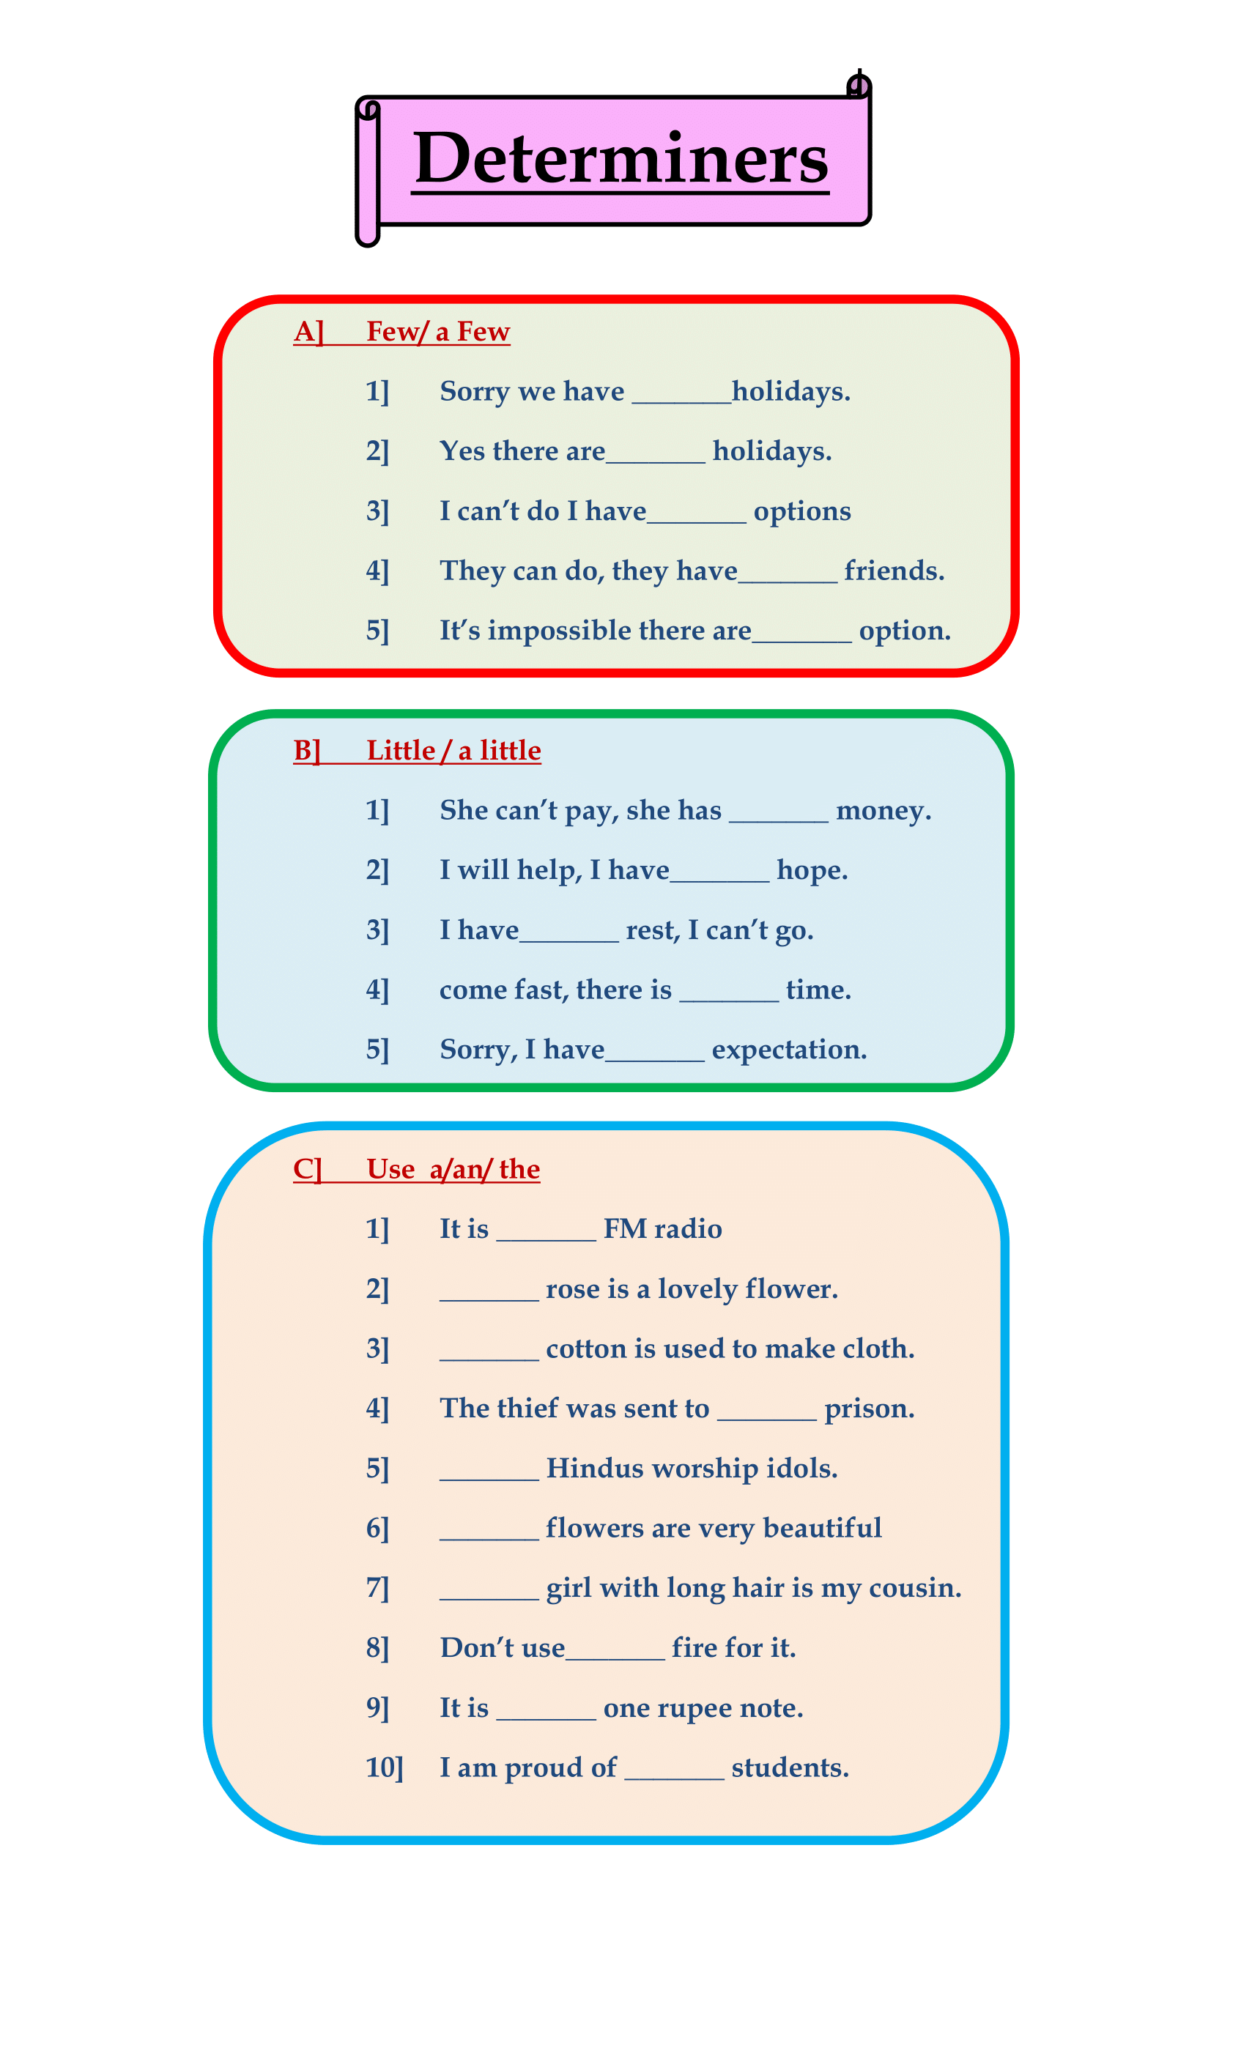 determiners-worksheets-for-class-english-grammar-grade-my-xxx-hot-girl